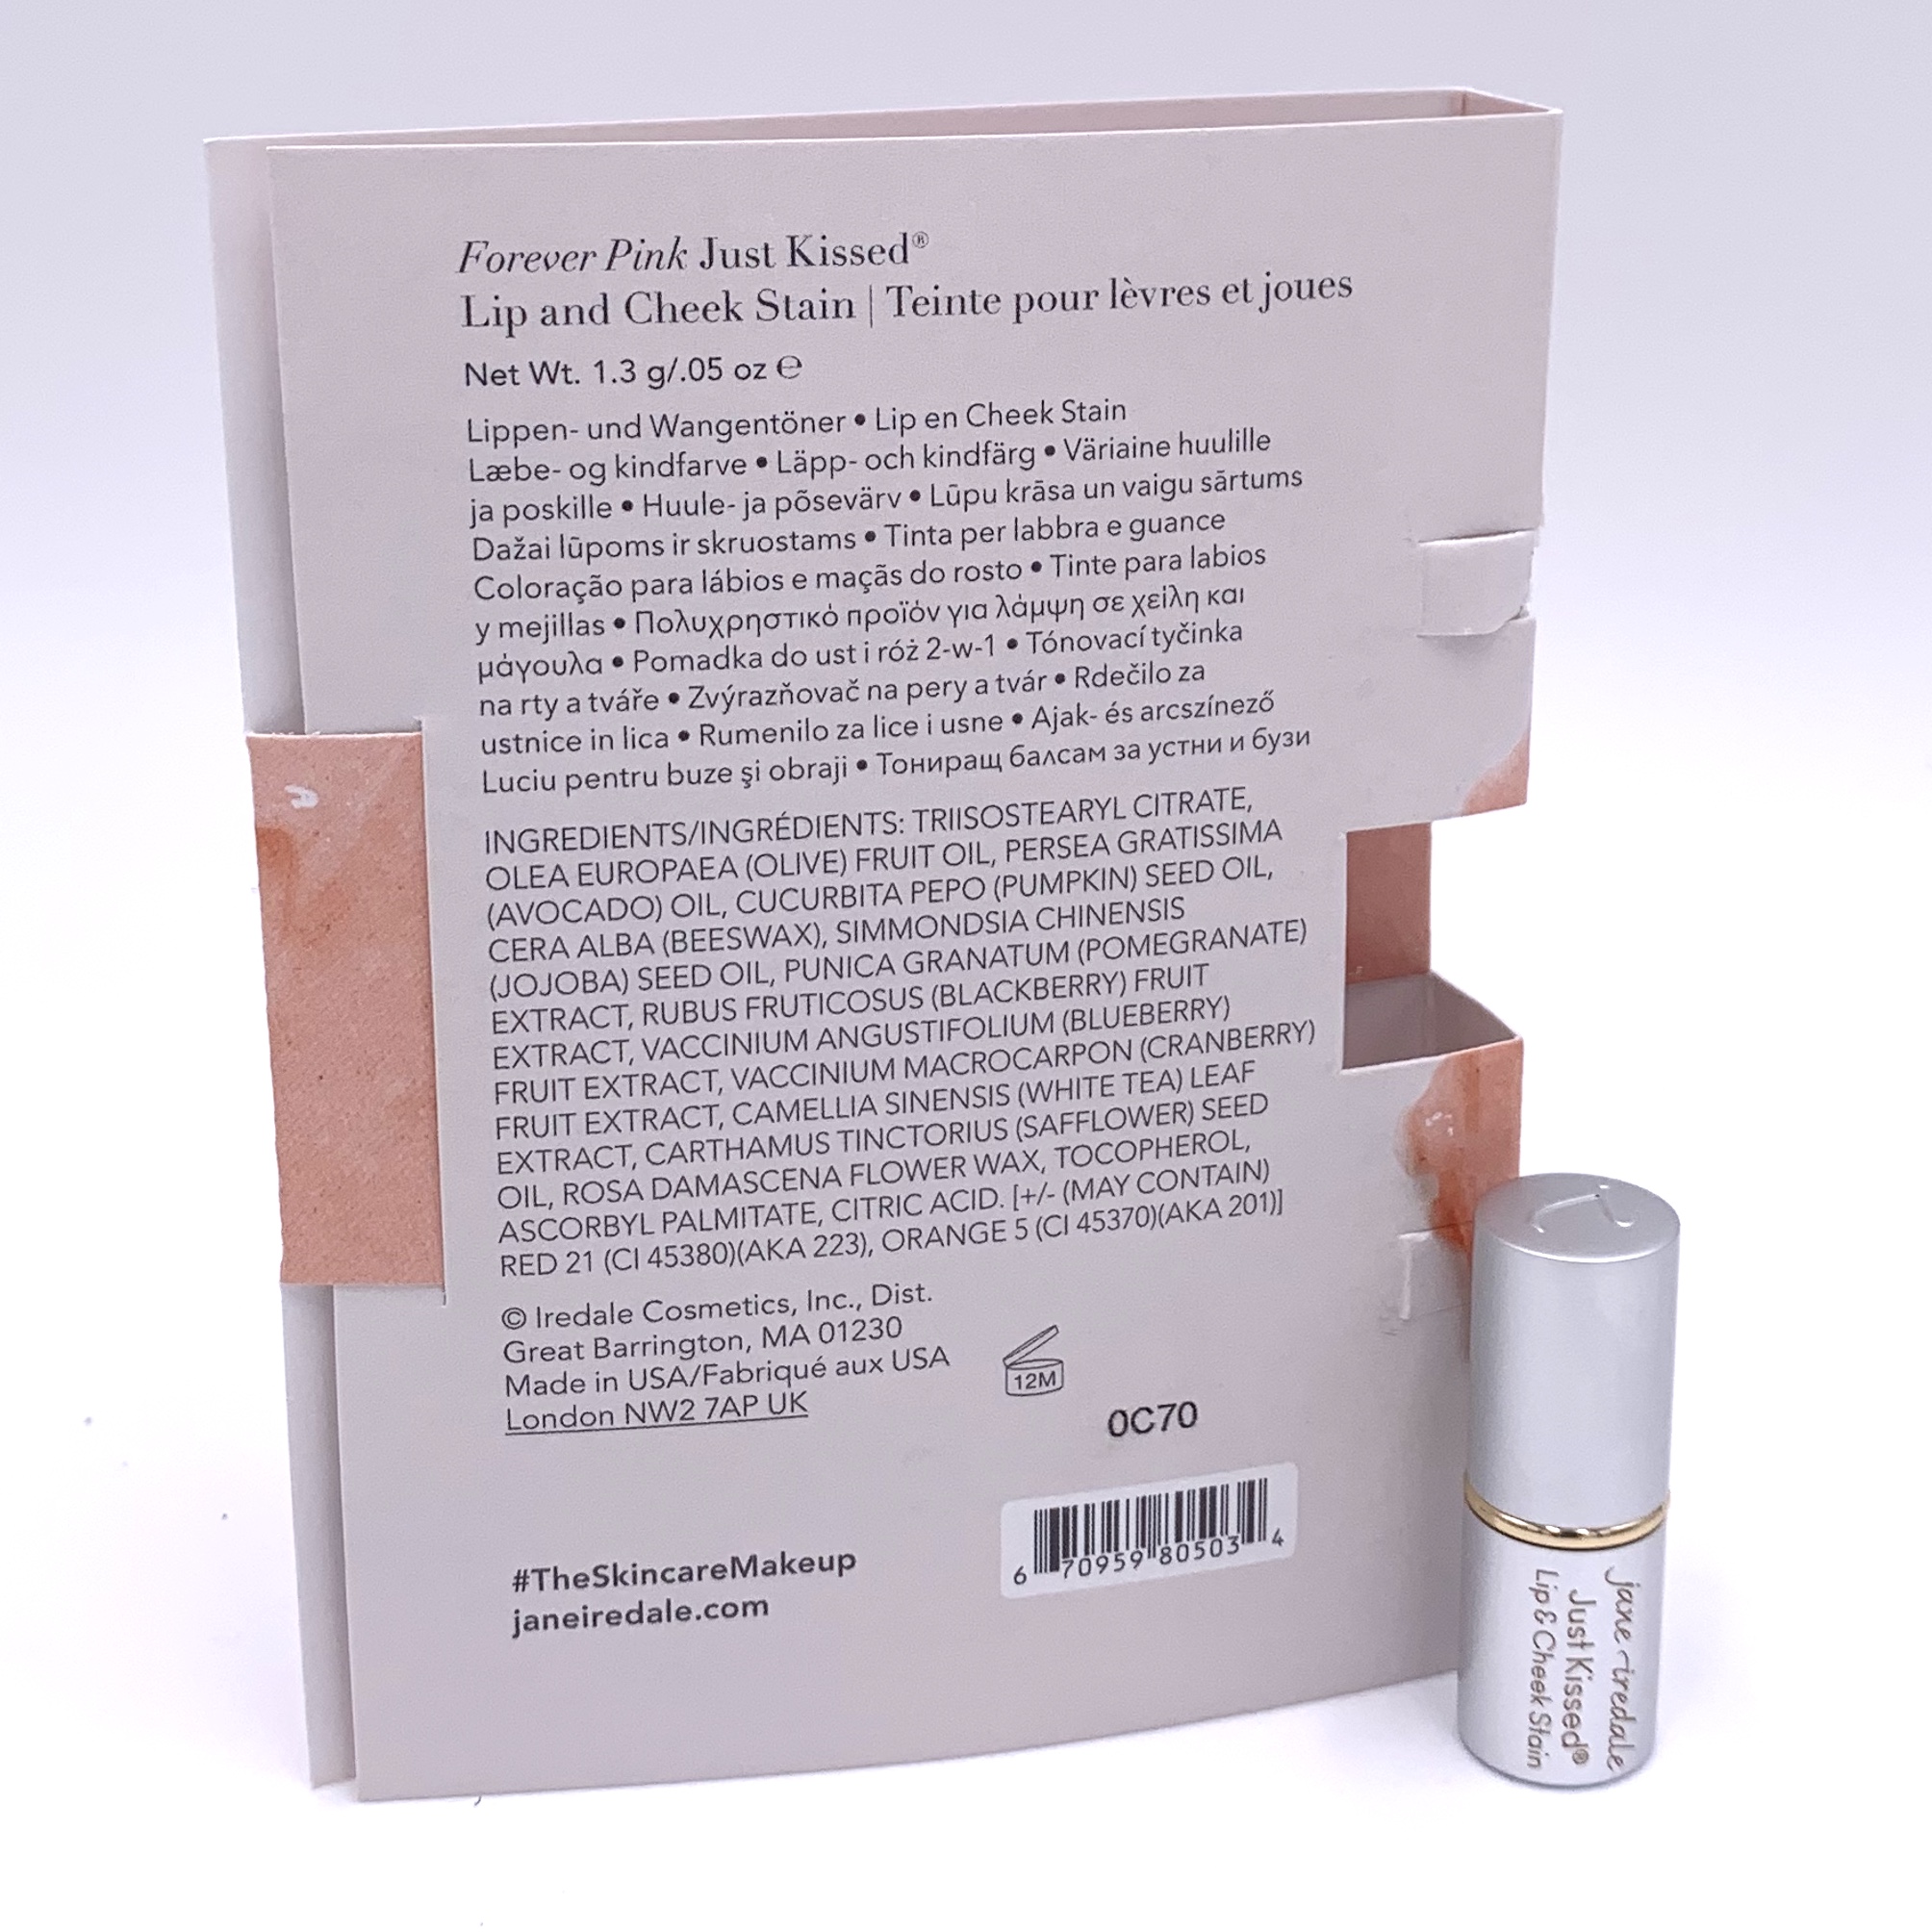 Jane Iredale Just Kissed Lip & Cheek Stain - Forever Pink Back for Birchbox August 2020